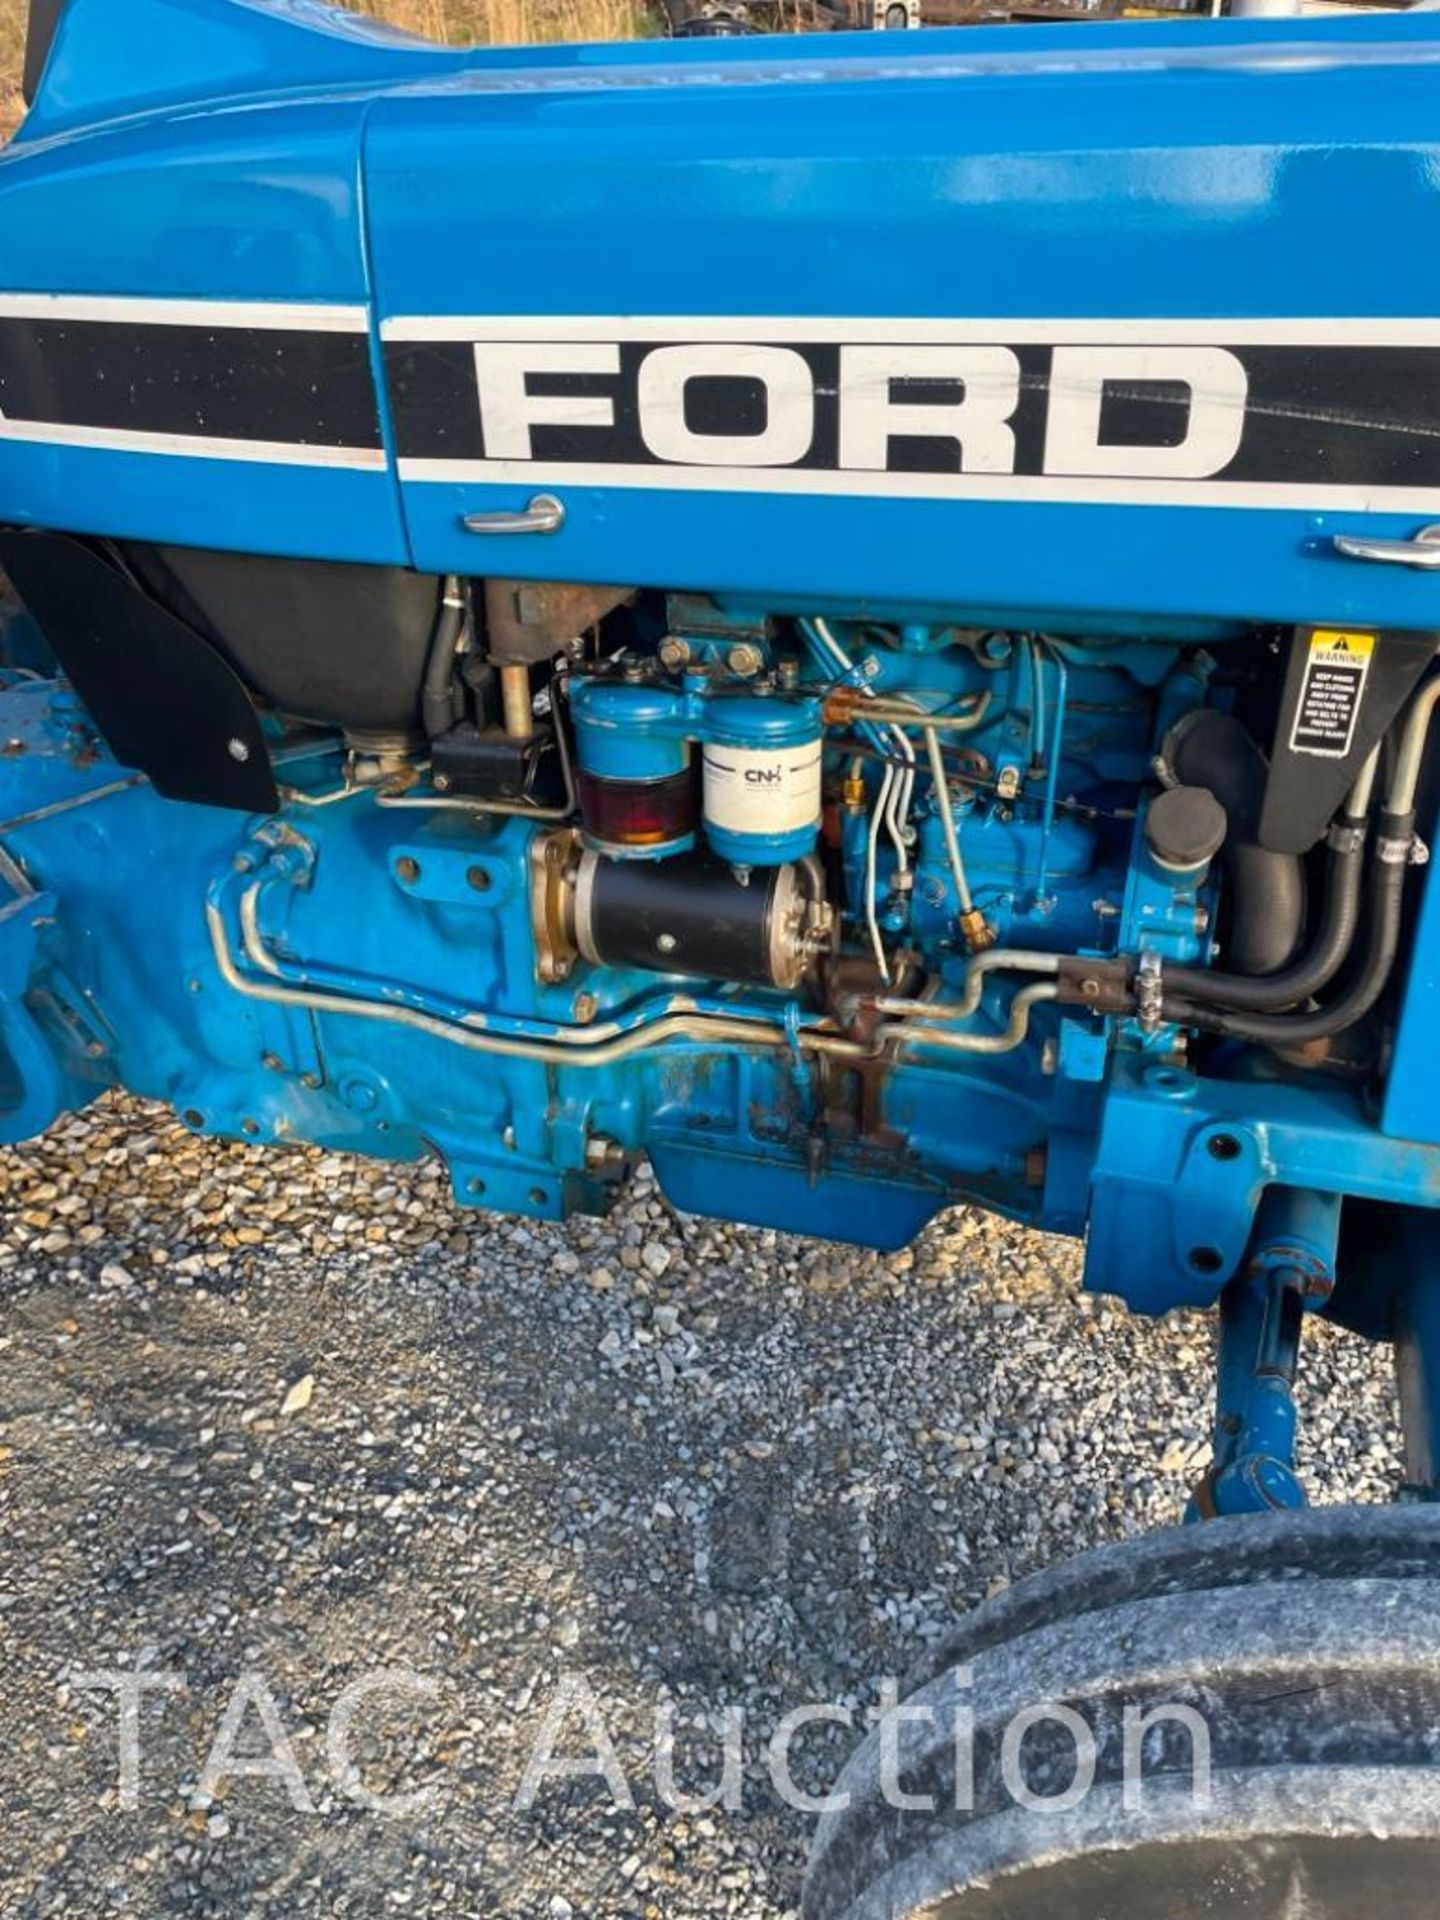 1995 Ford 3930 Farm Tractor - Image 6 of 7